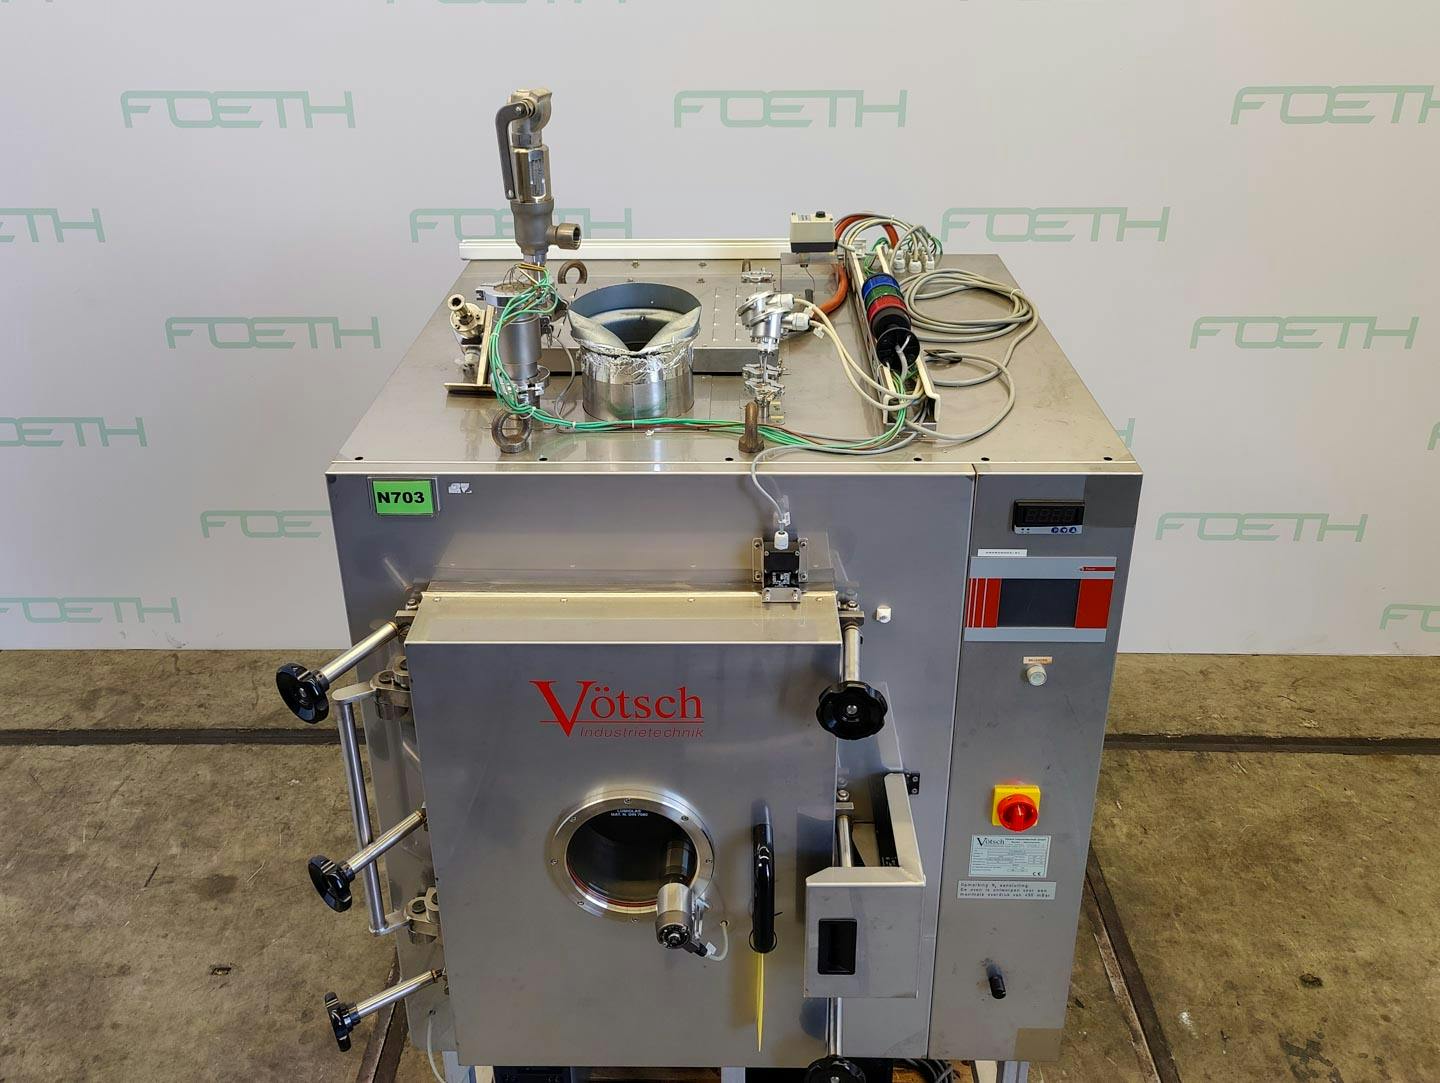 Vötsch VVT 50/65/80 - vacuum drying oven - Drying oven - image 10